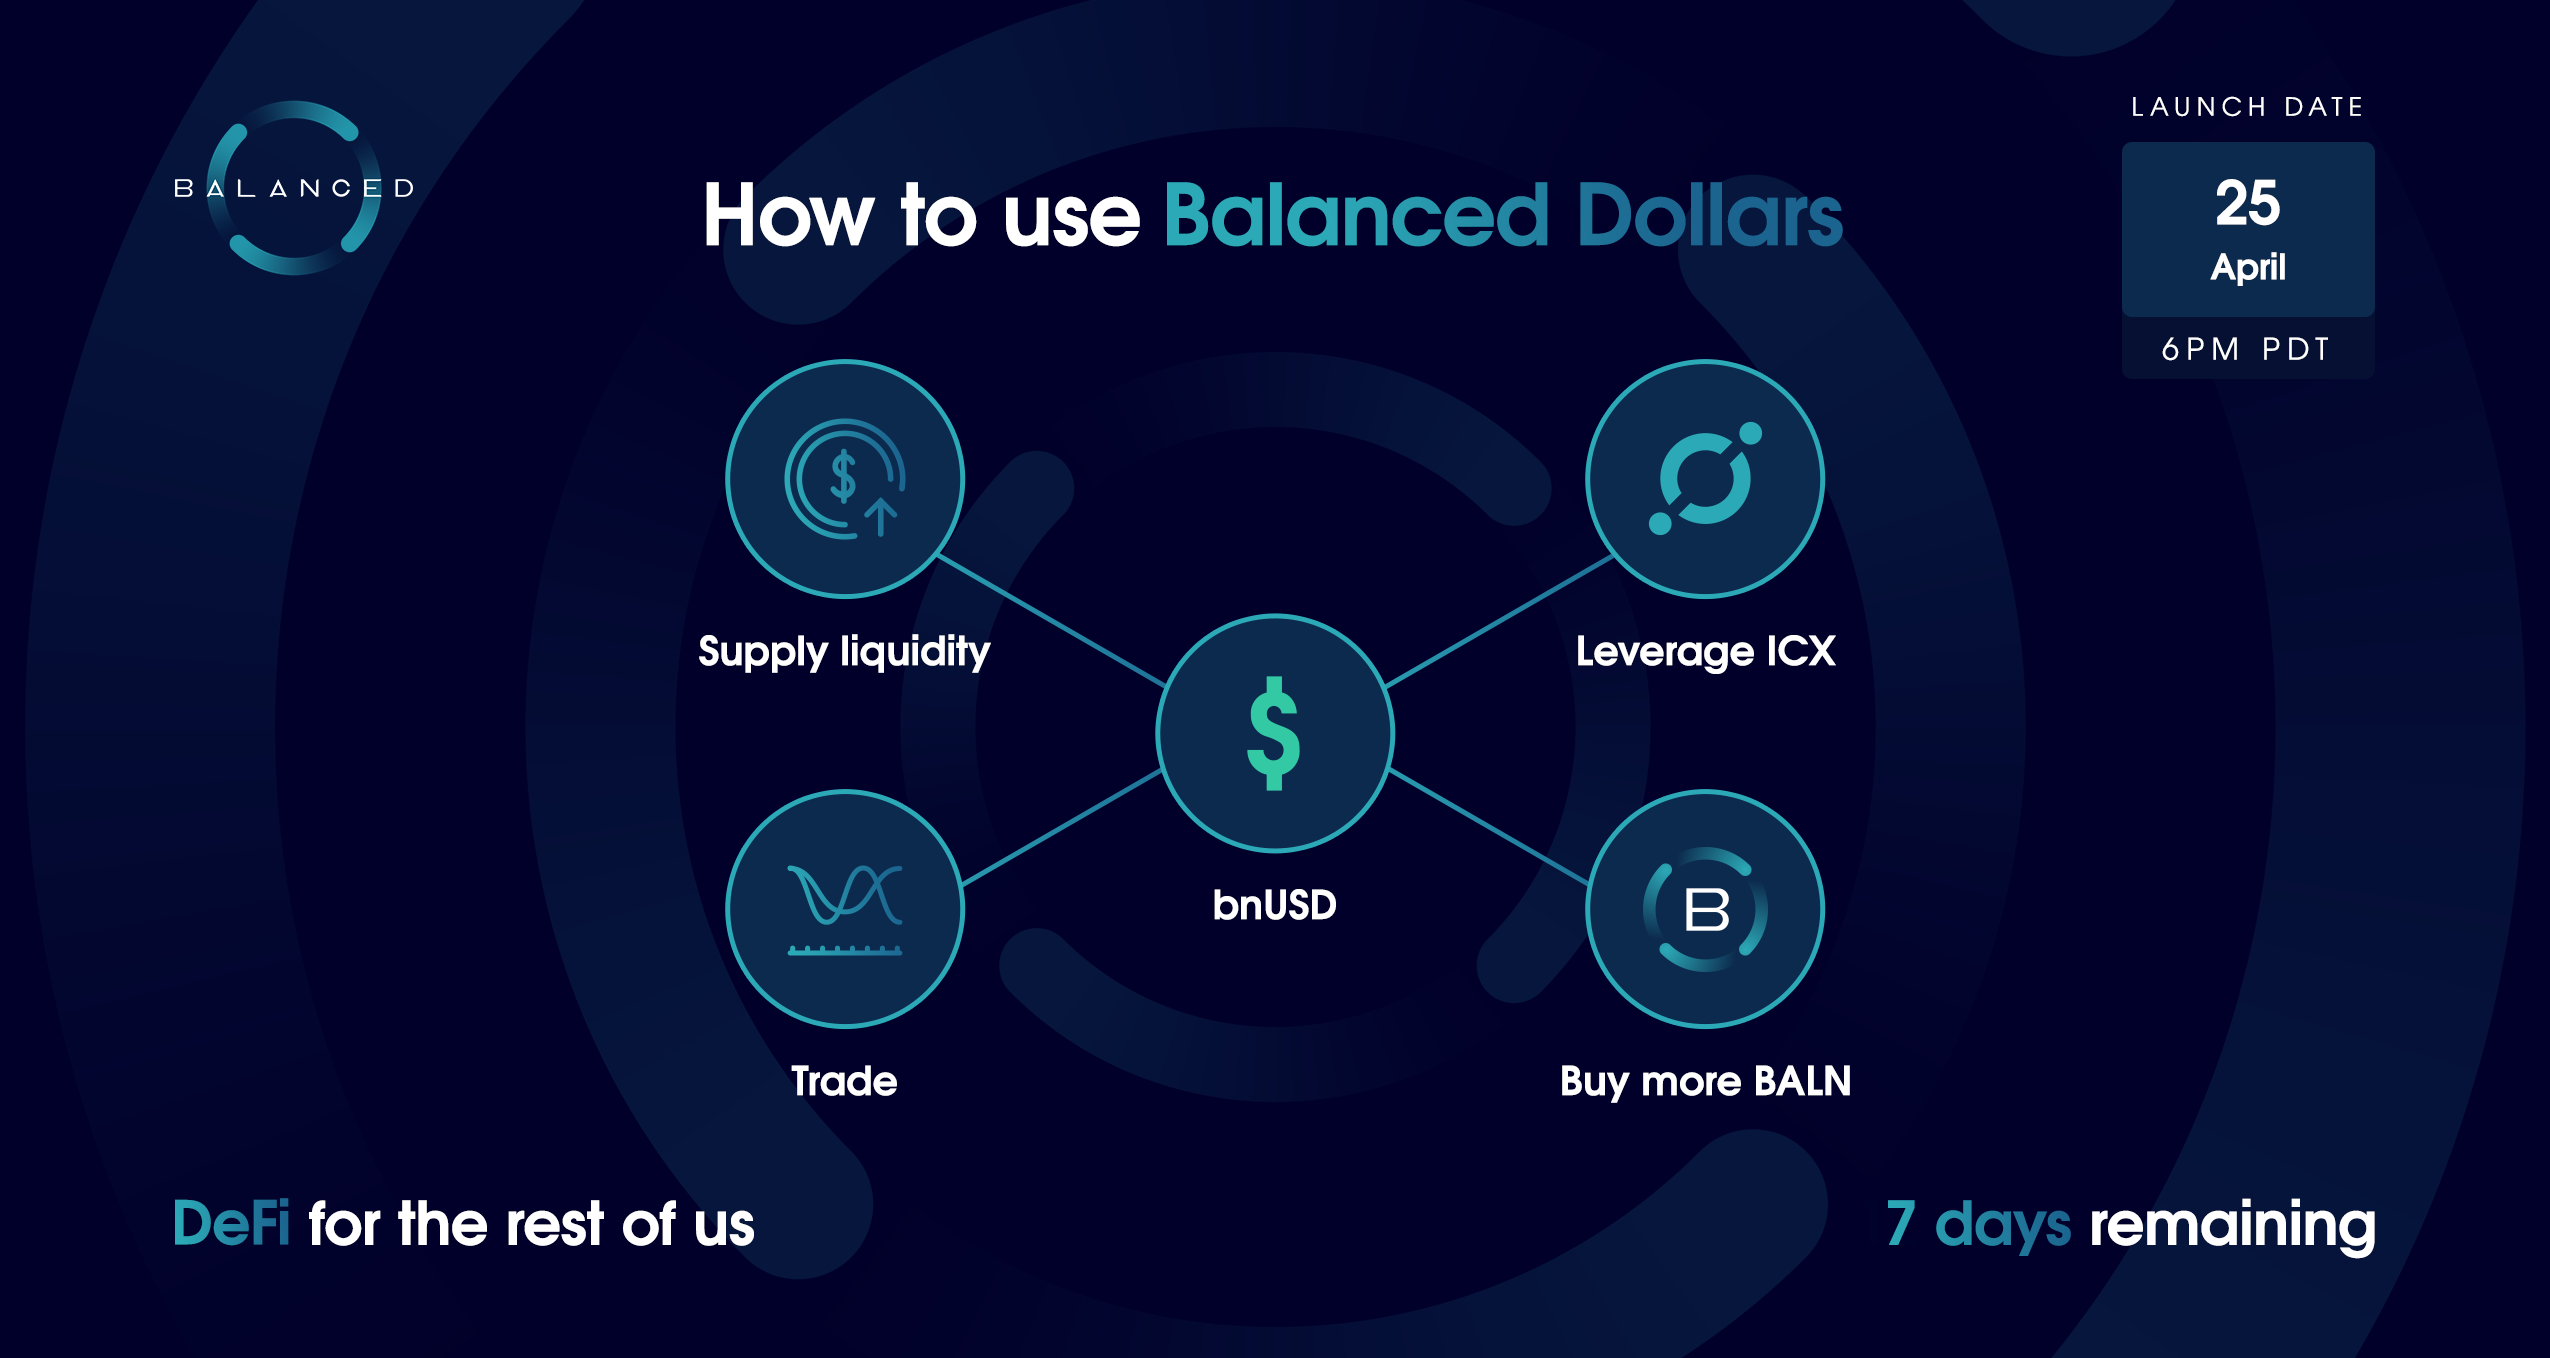 The making of Balanced: Designing DeFi for the rest of us